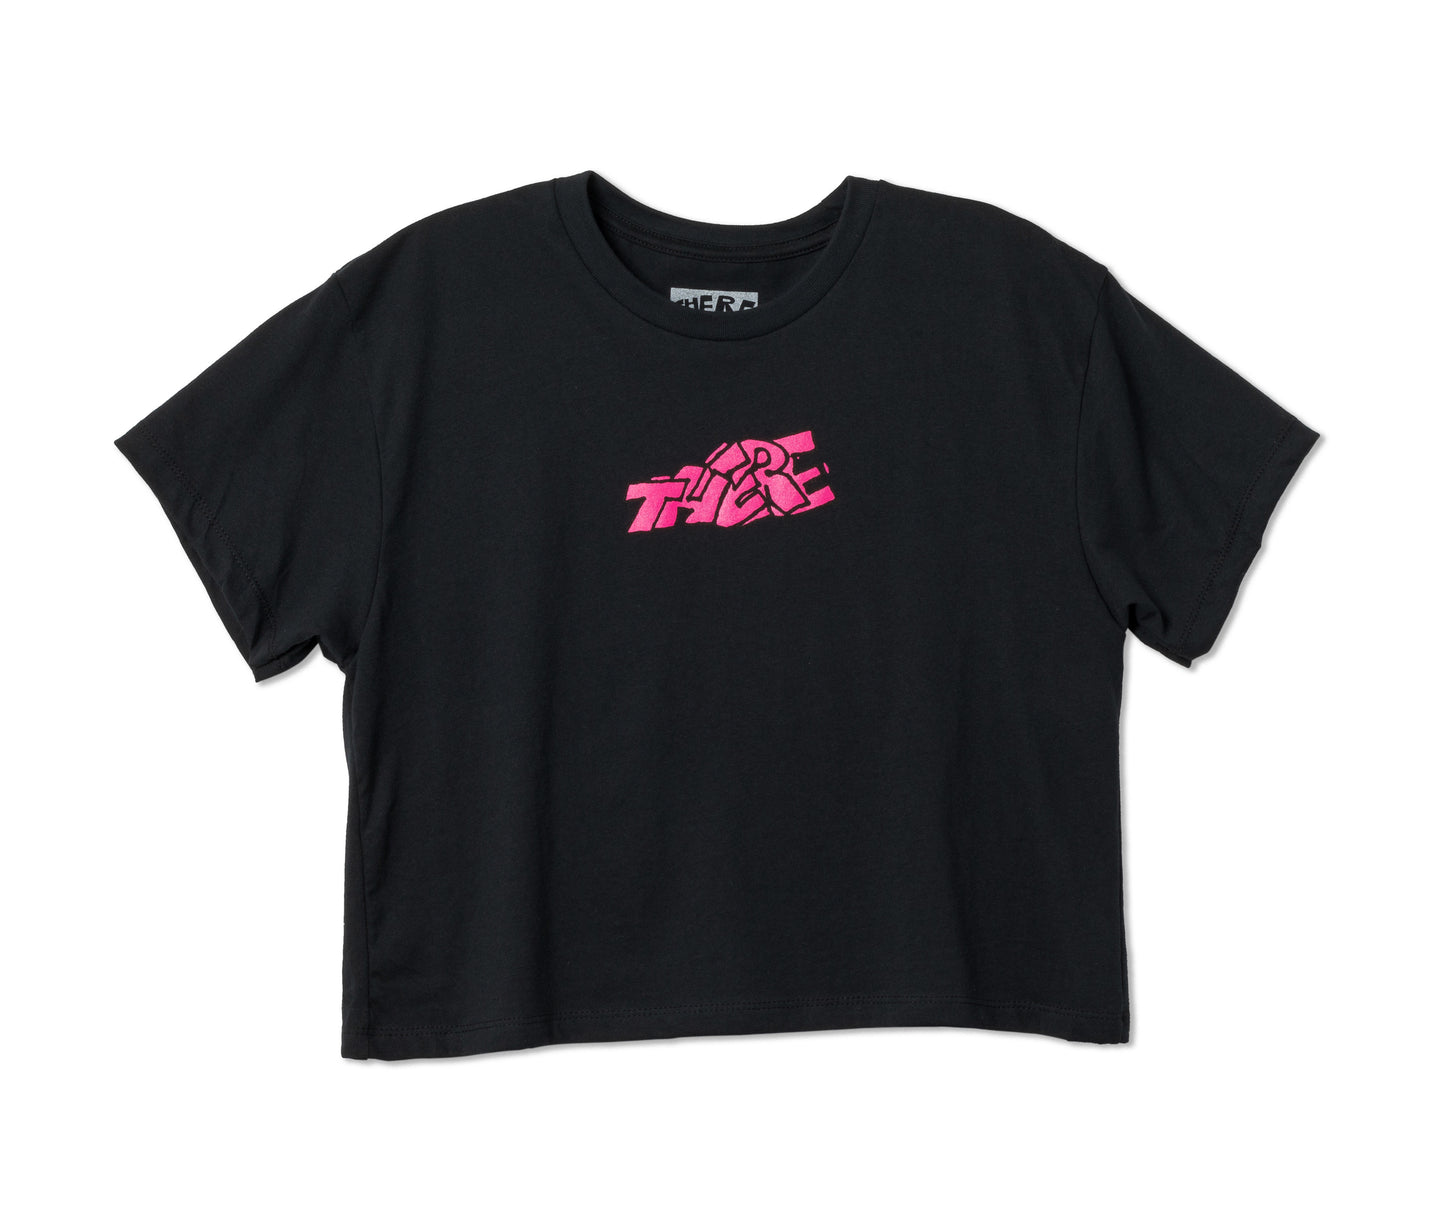 "Blocky" There Crop Tee